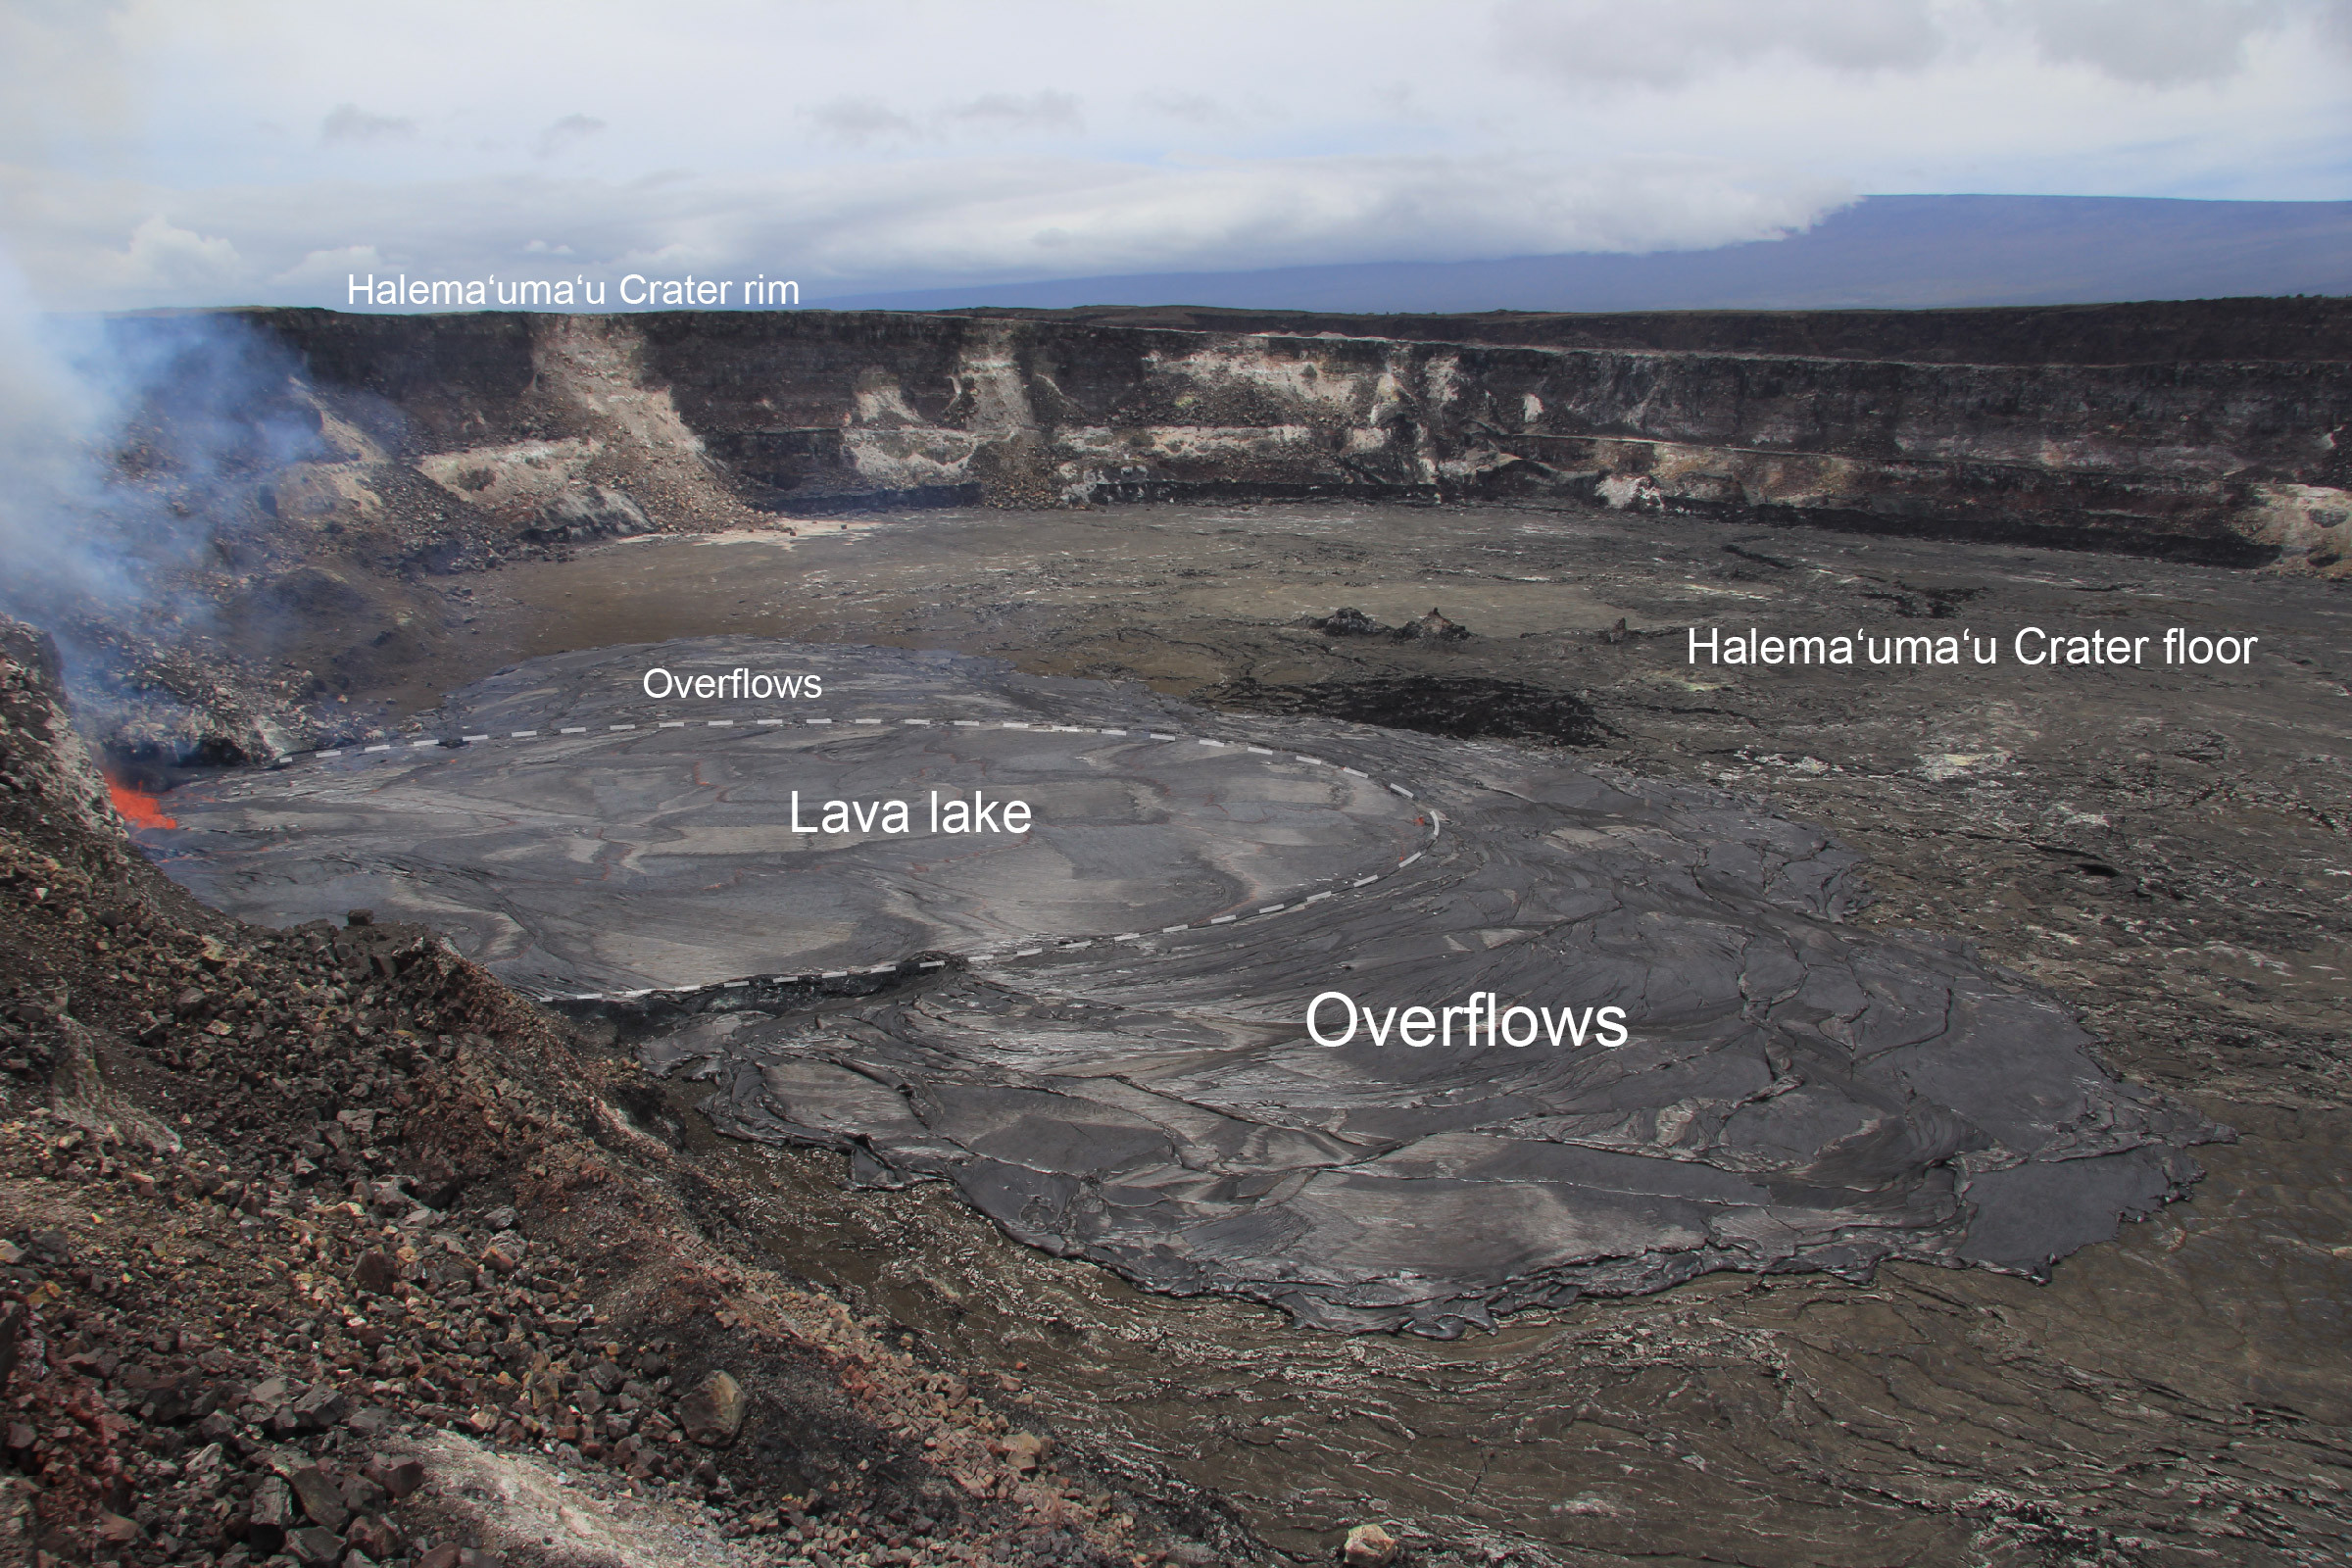 (USGS image) Labeled poto of the overflowing lava lake taken from the rim of Halemaʻumaʻu.